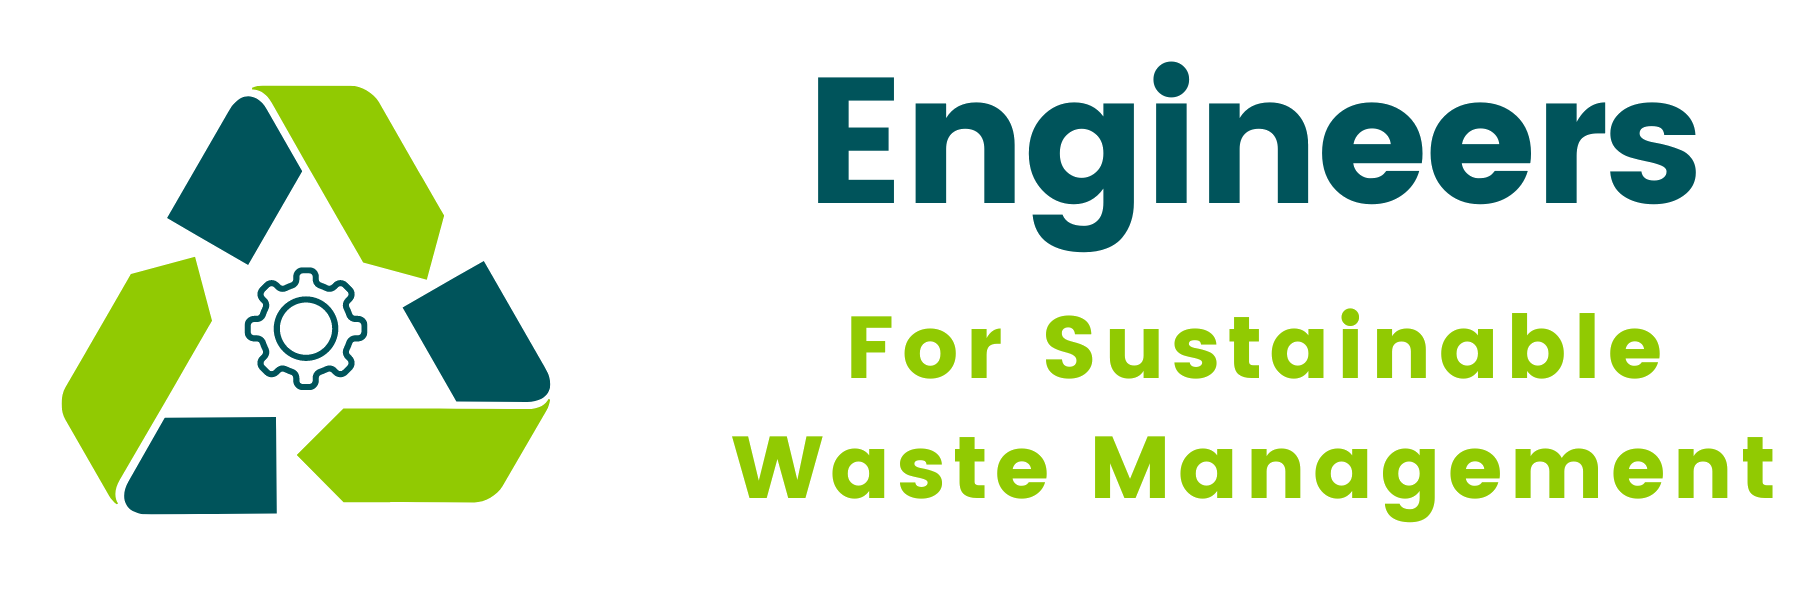 Engineers for Sustainable Waste Management